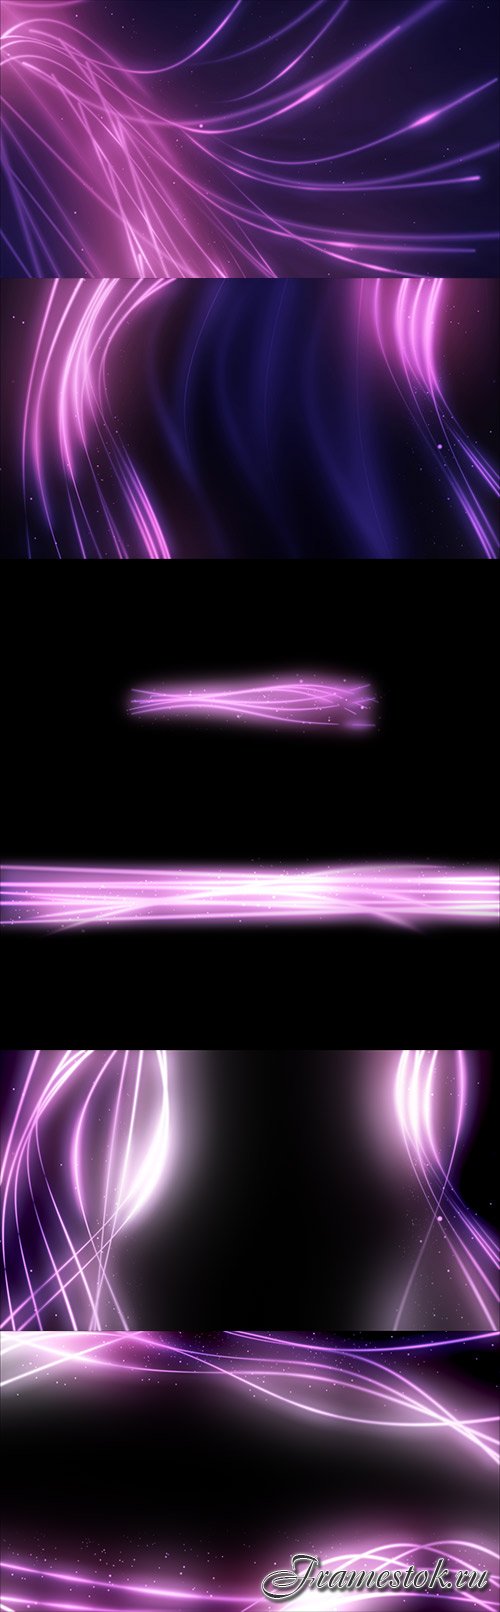 Purple abstract lines on a transparent background